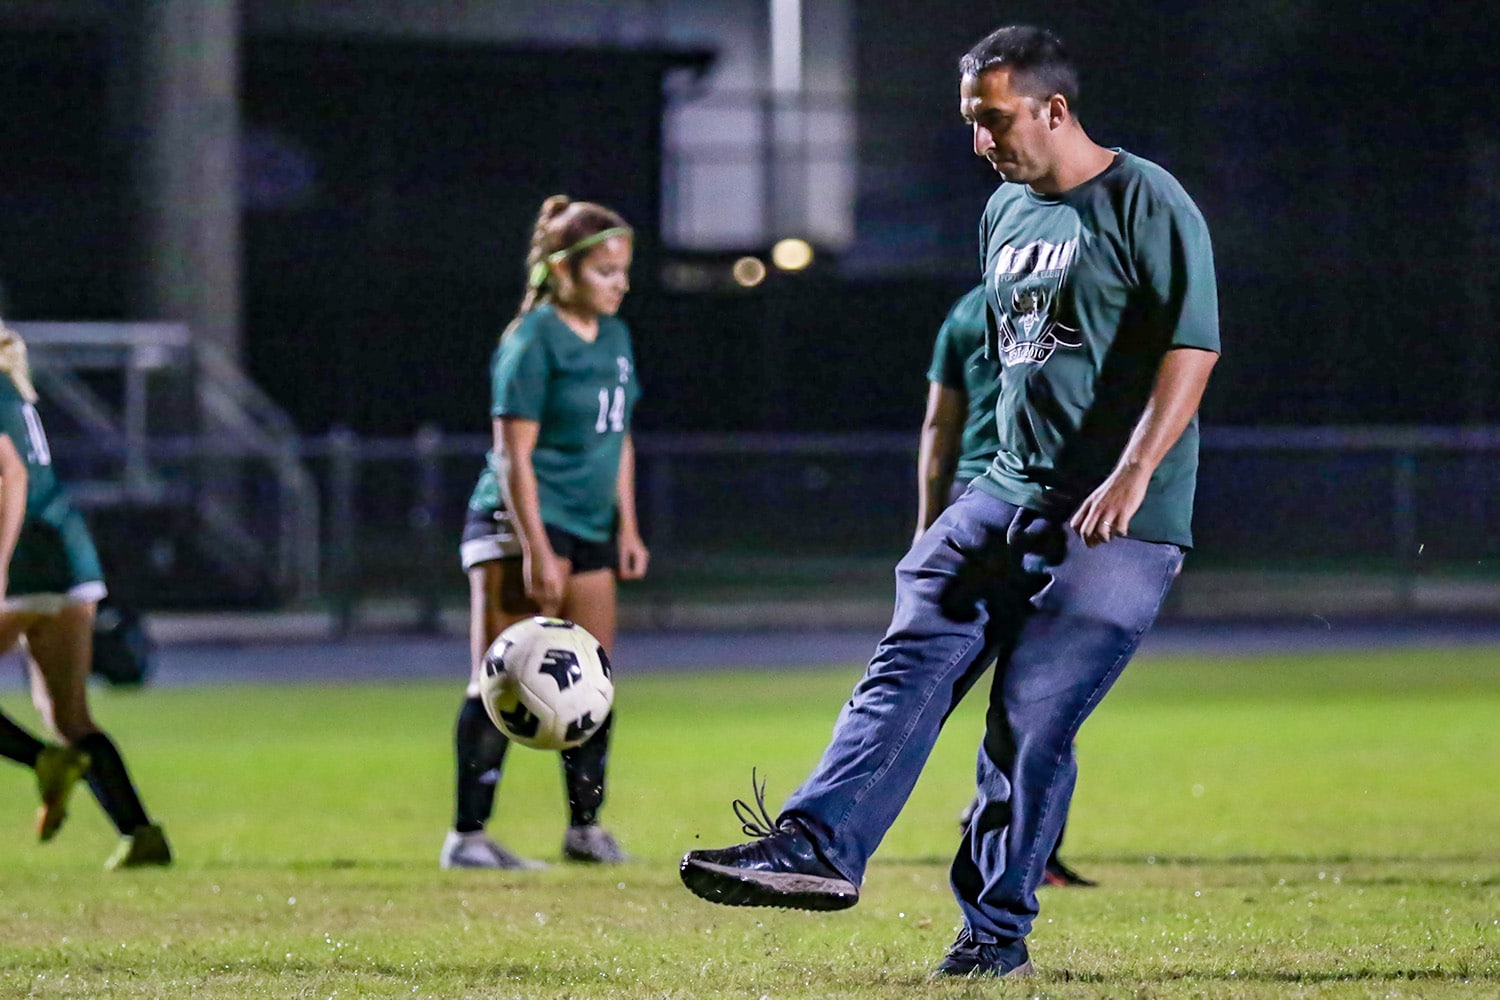 Weeki Wachee Girls Soccer Team's Head Coach Tom Pellito, warms up his goalie at Wednesdays game on November 30, 2022 against Citrus. Photo by Cheryl Clanton.